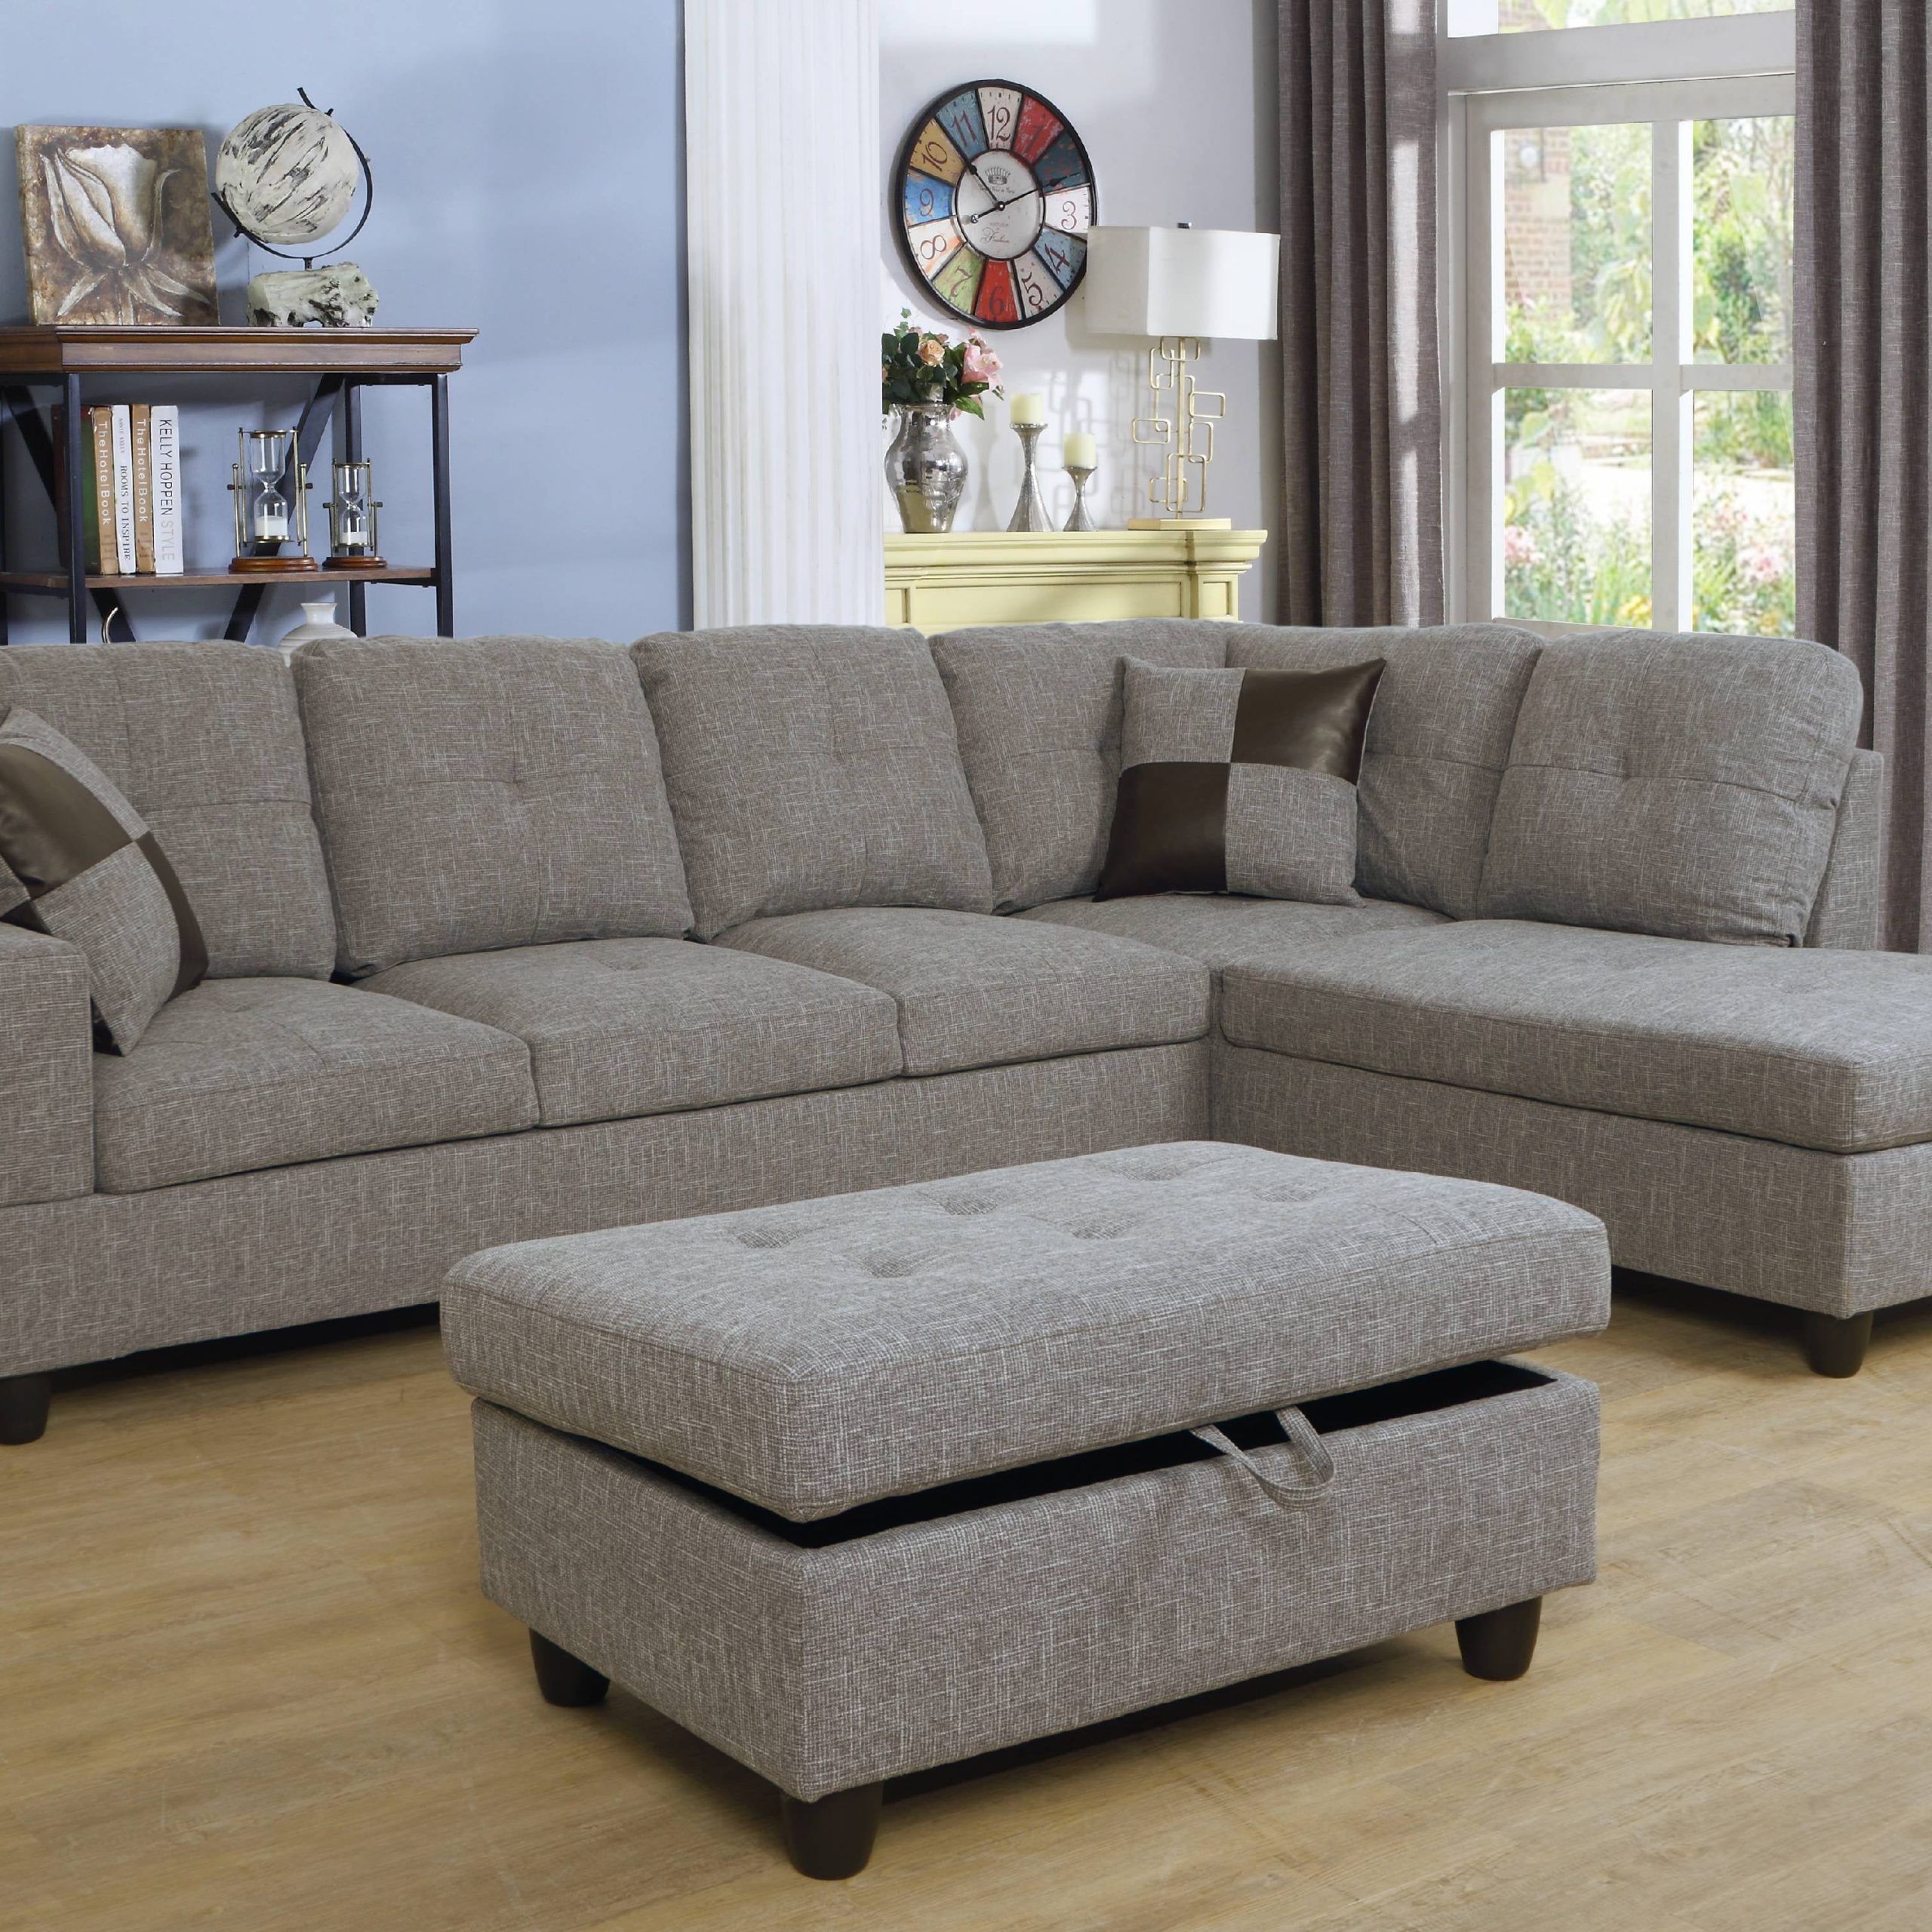 Ashey Furniture – L Shape Sectional Sofa Set With Storage Ottoman Throughout Sofas With Ottomans (Gallery 10 of 20)